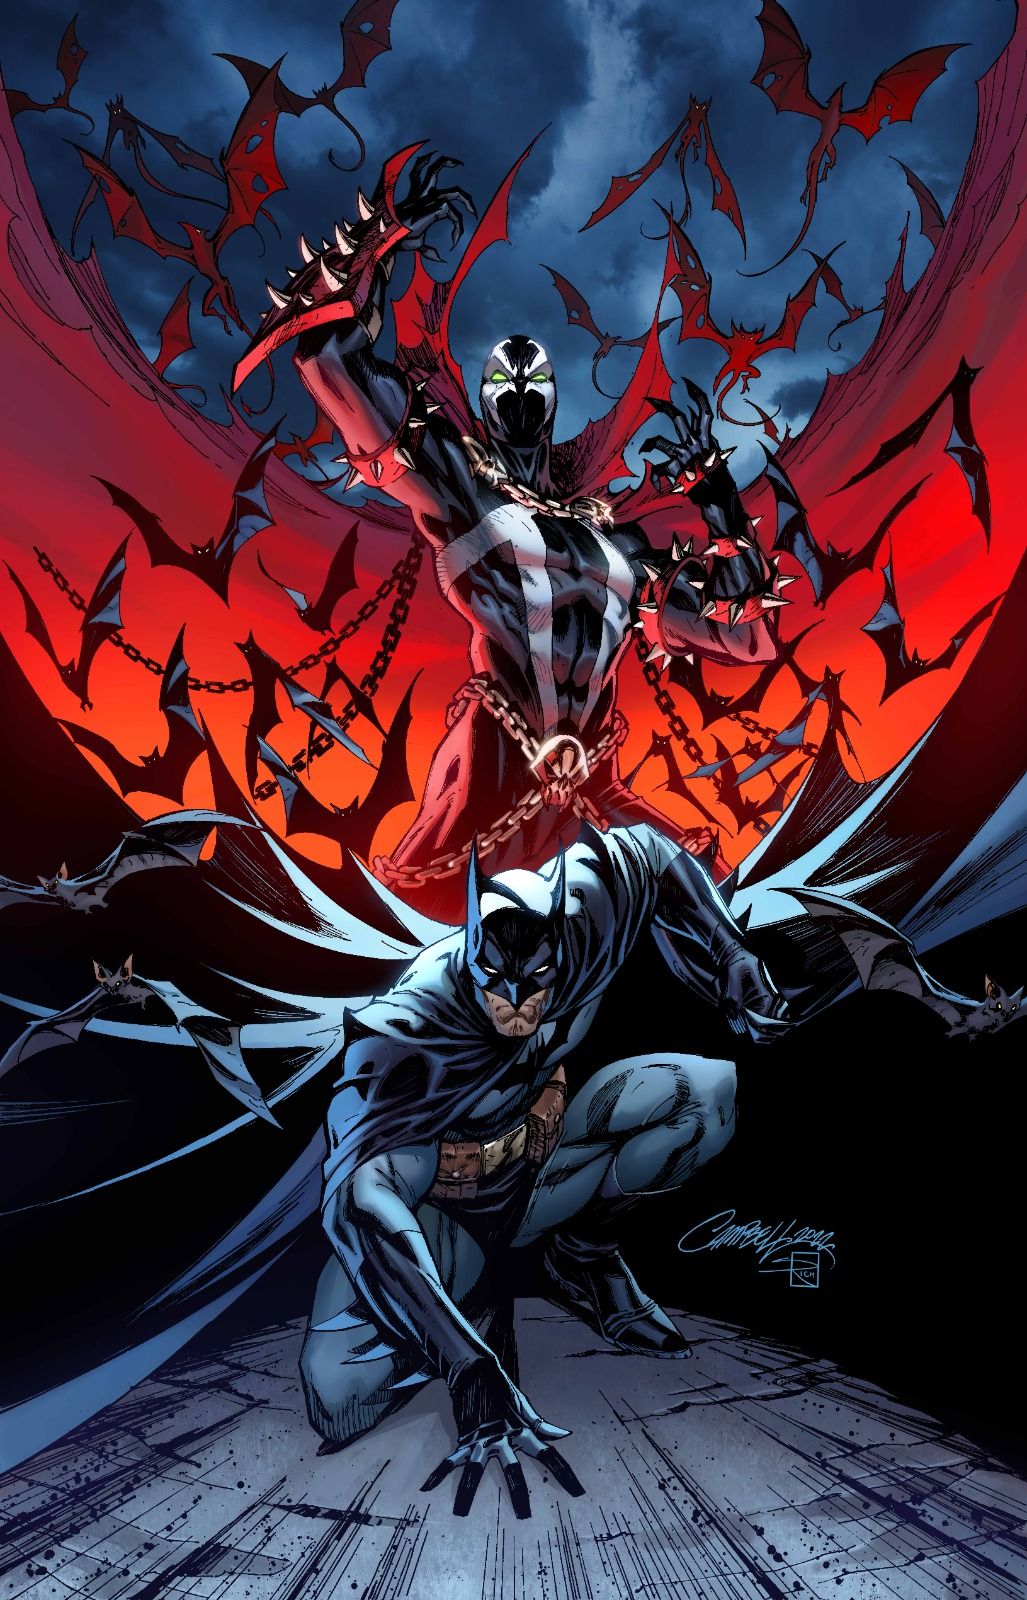 Spawn Overpowers Batman in Stunning Capullo Variant